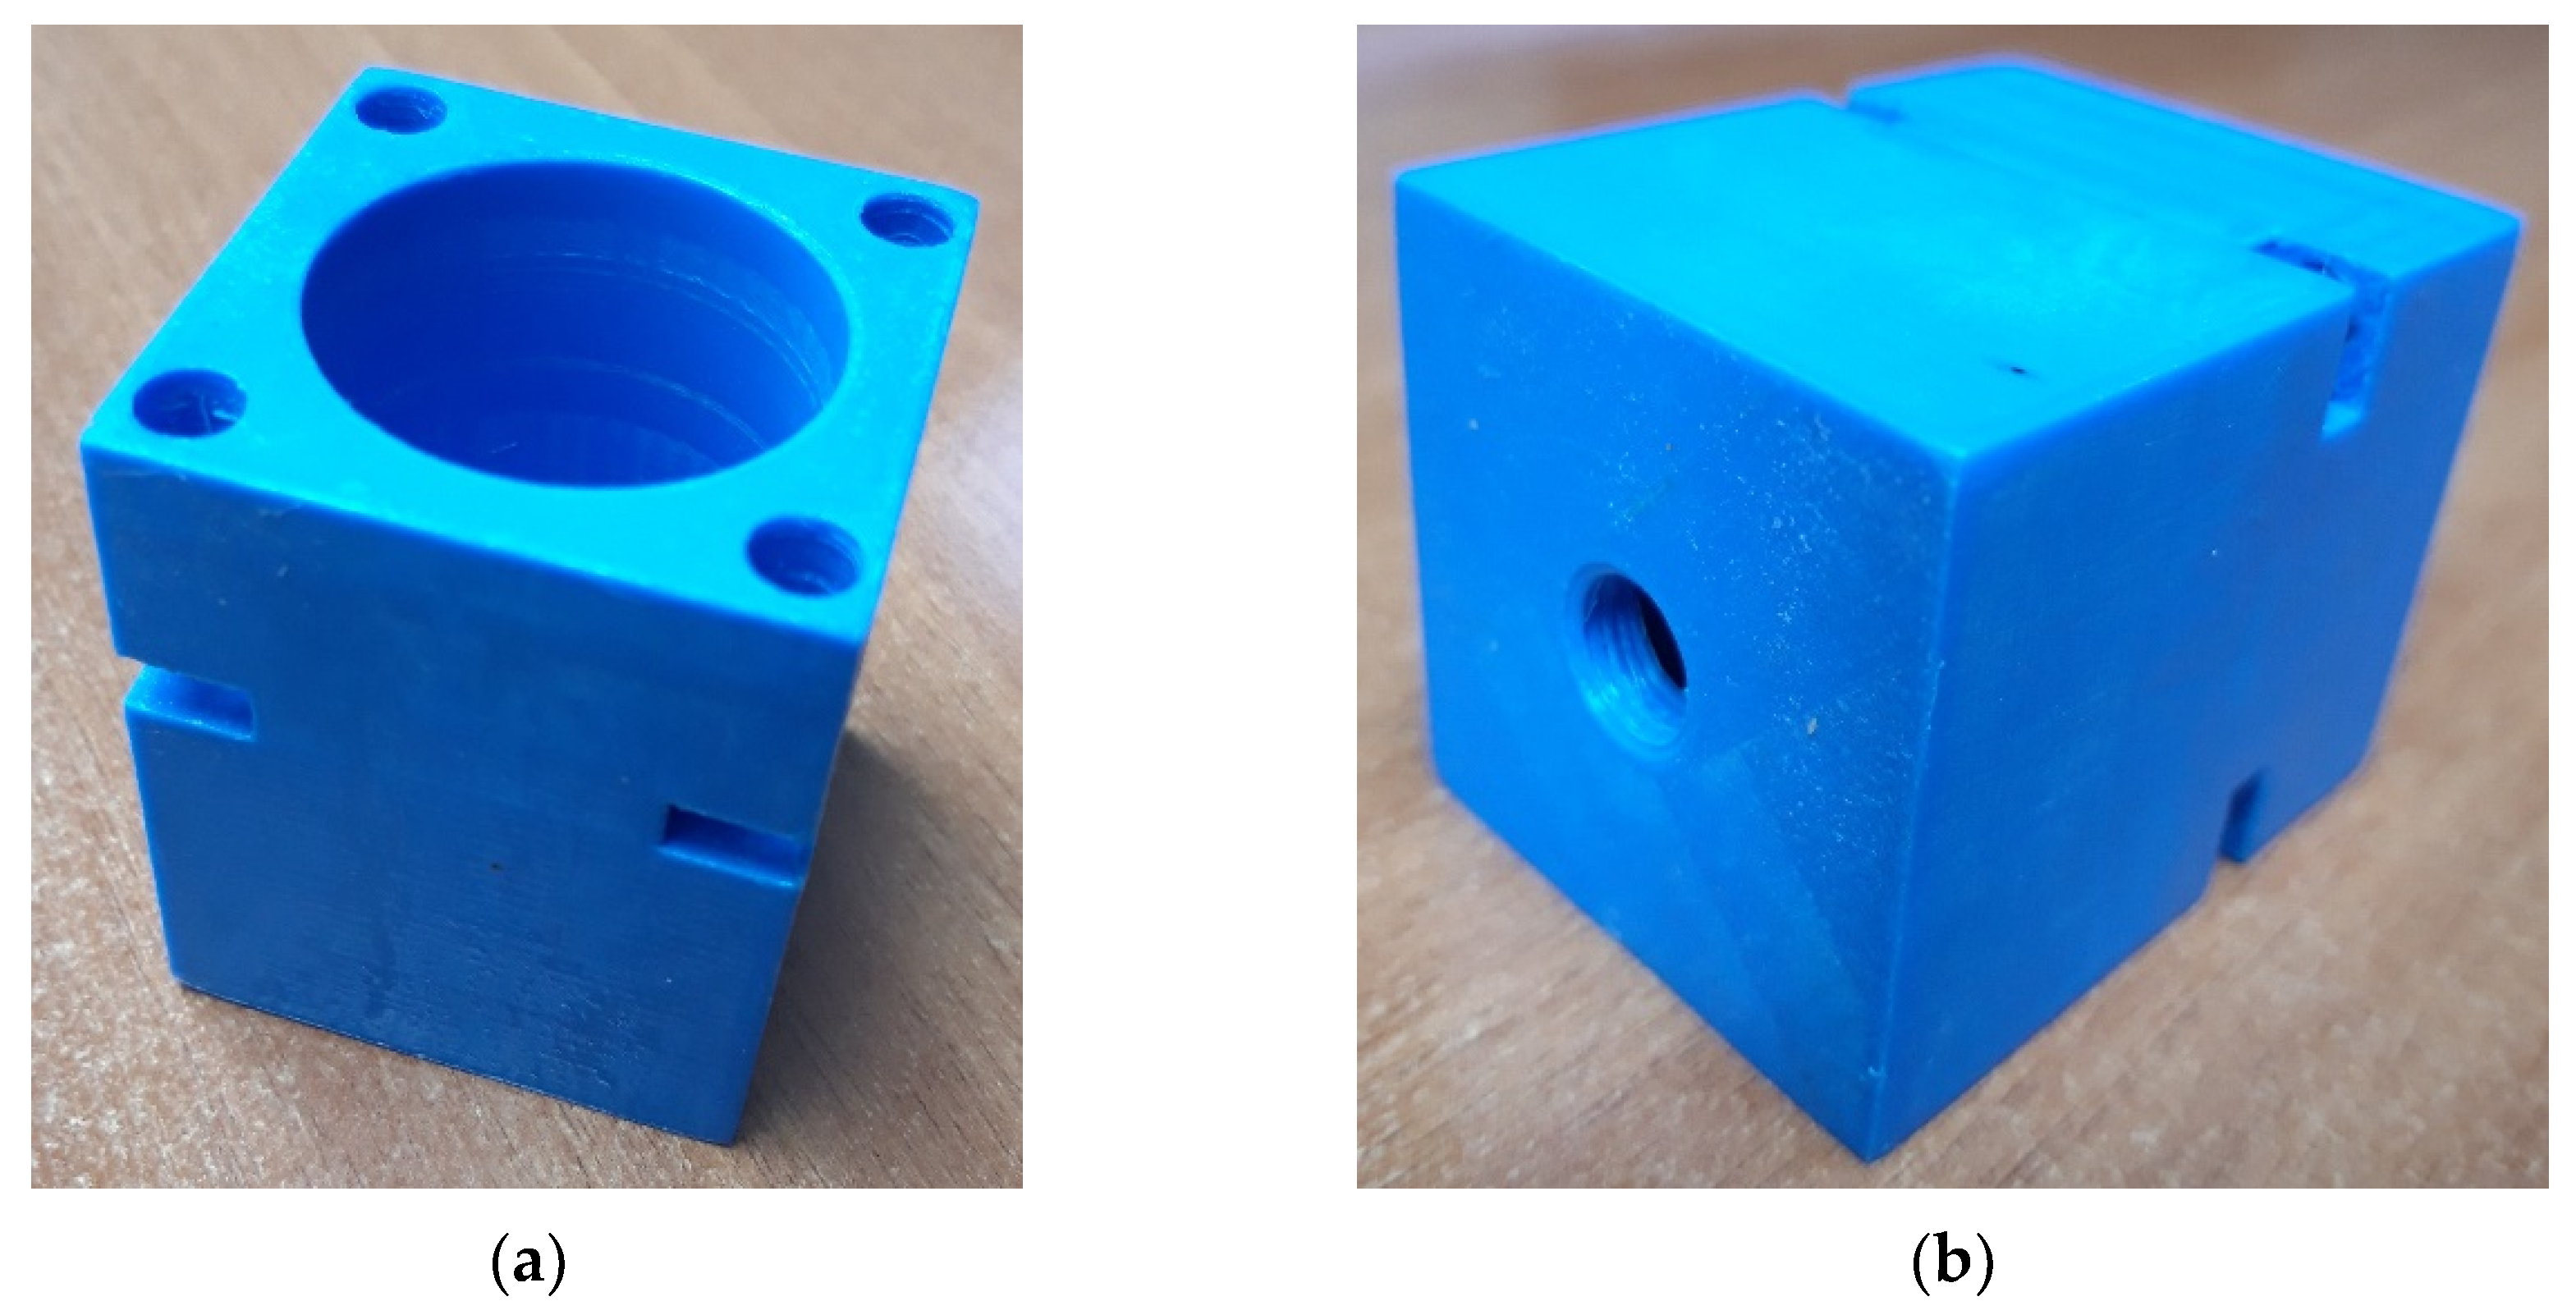 10 Useful things to 3D print, when owning a 3D printer, by Zorko Huljic